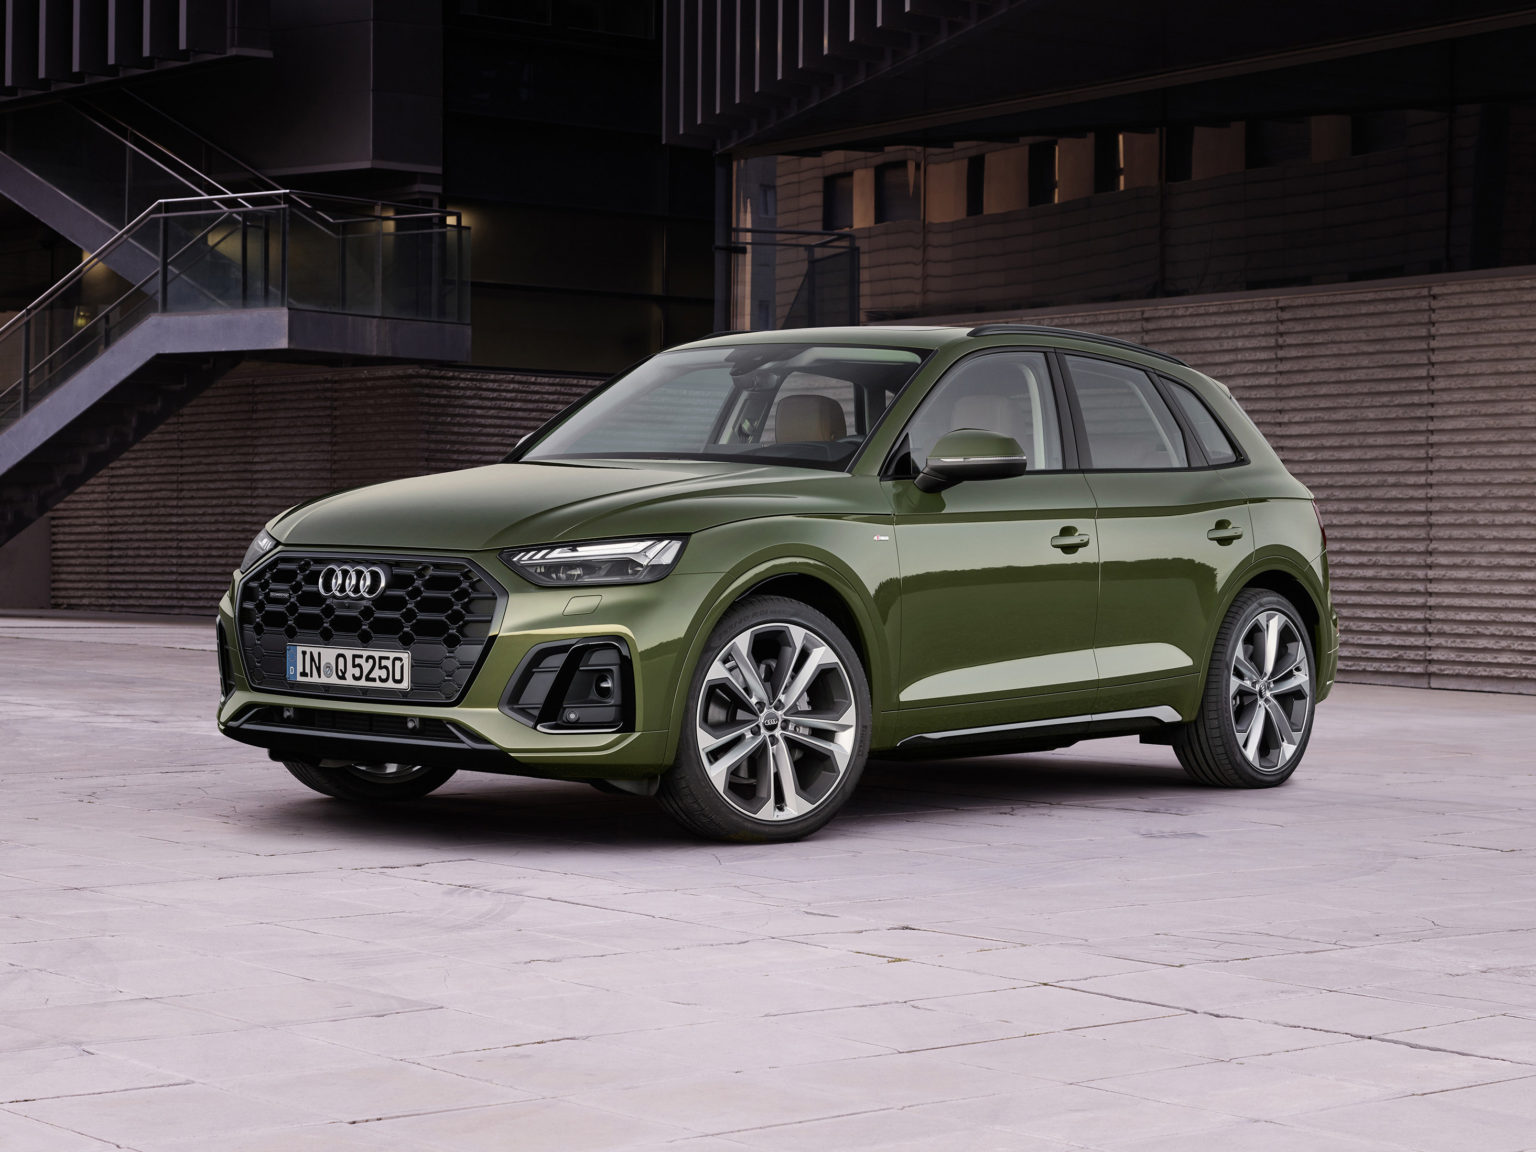 Audi has given the Q5 a fresh design and power boost for the 2021 model year.